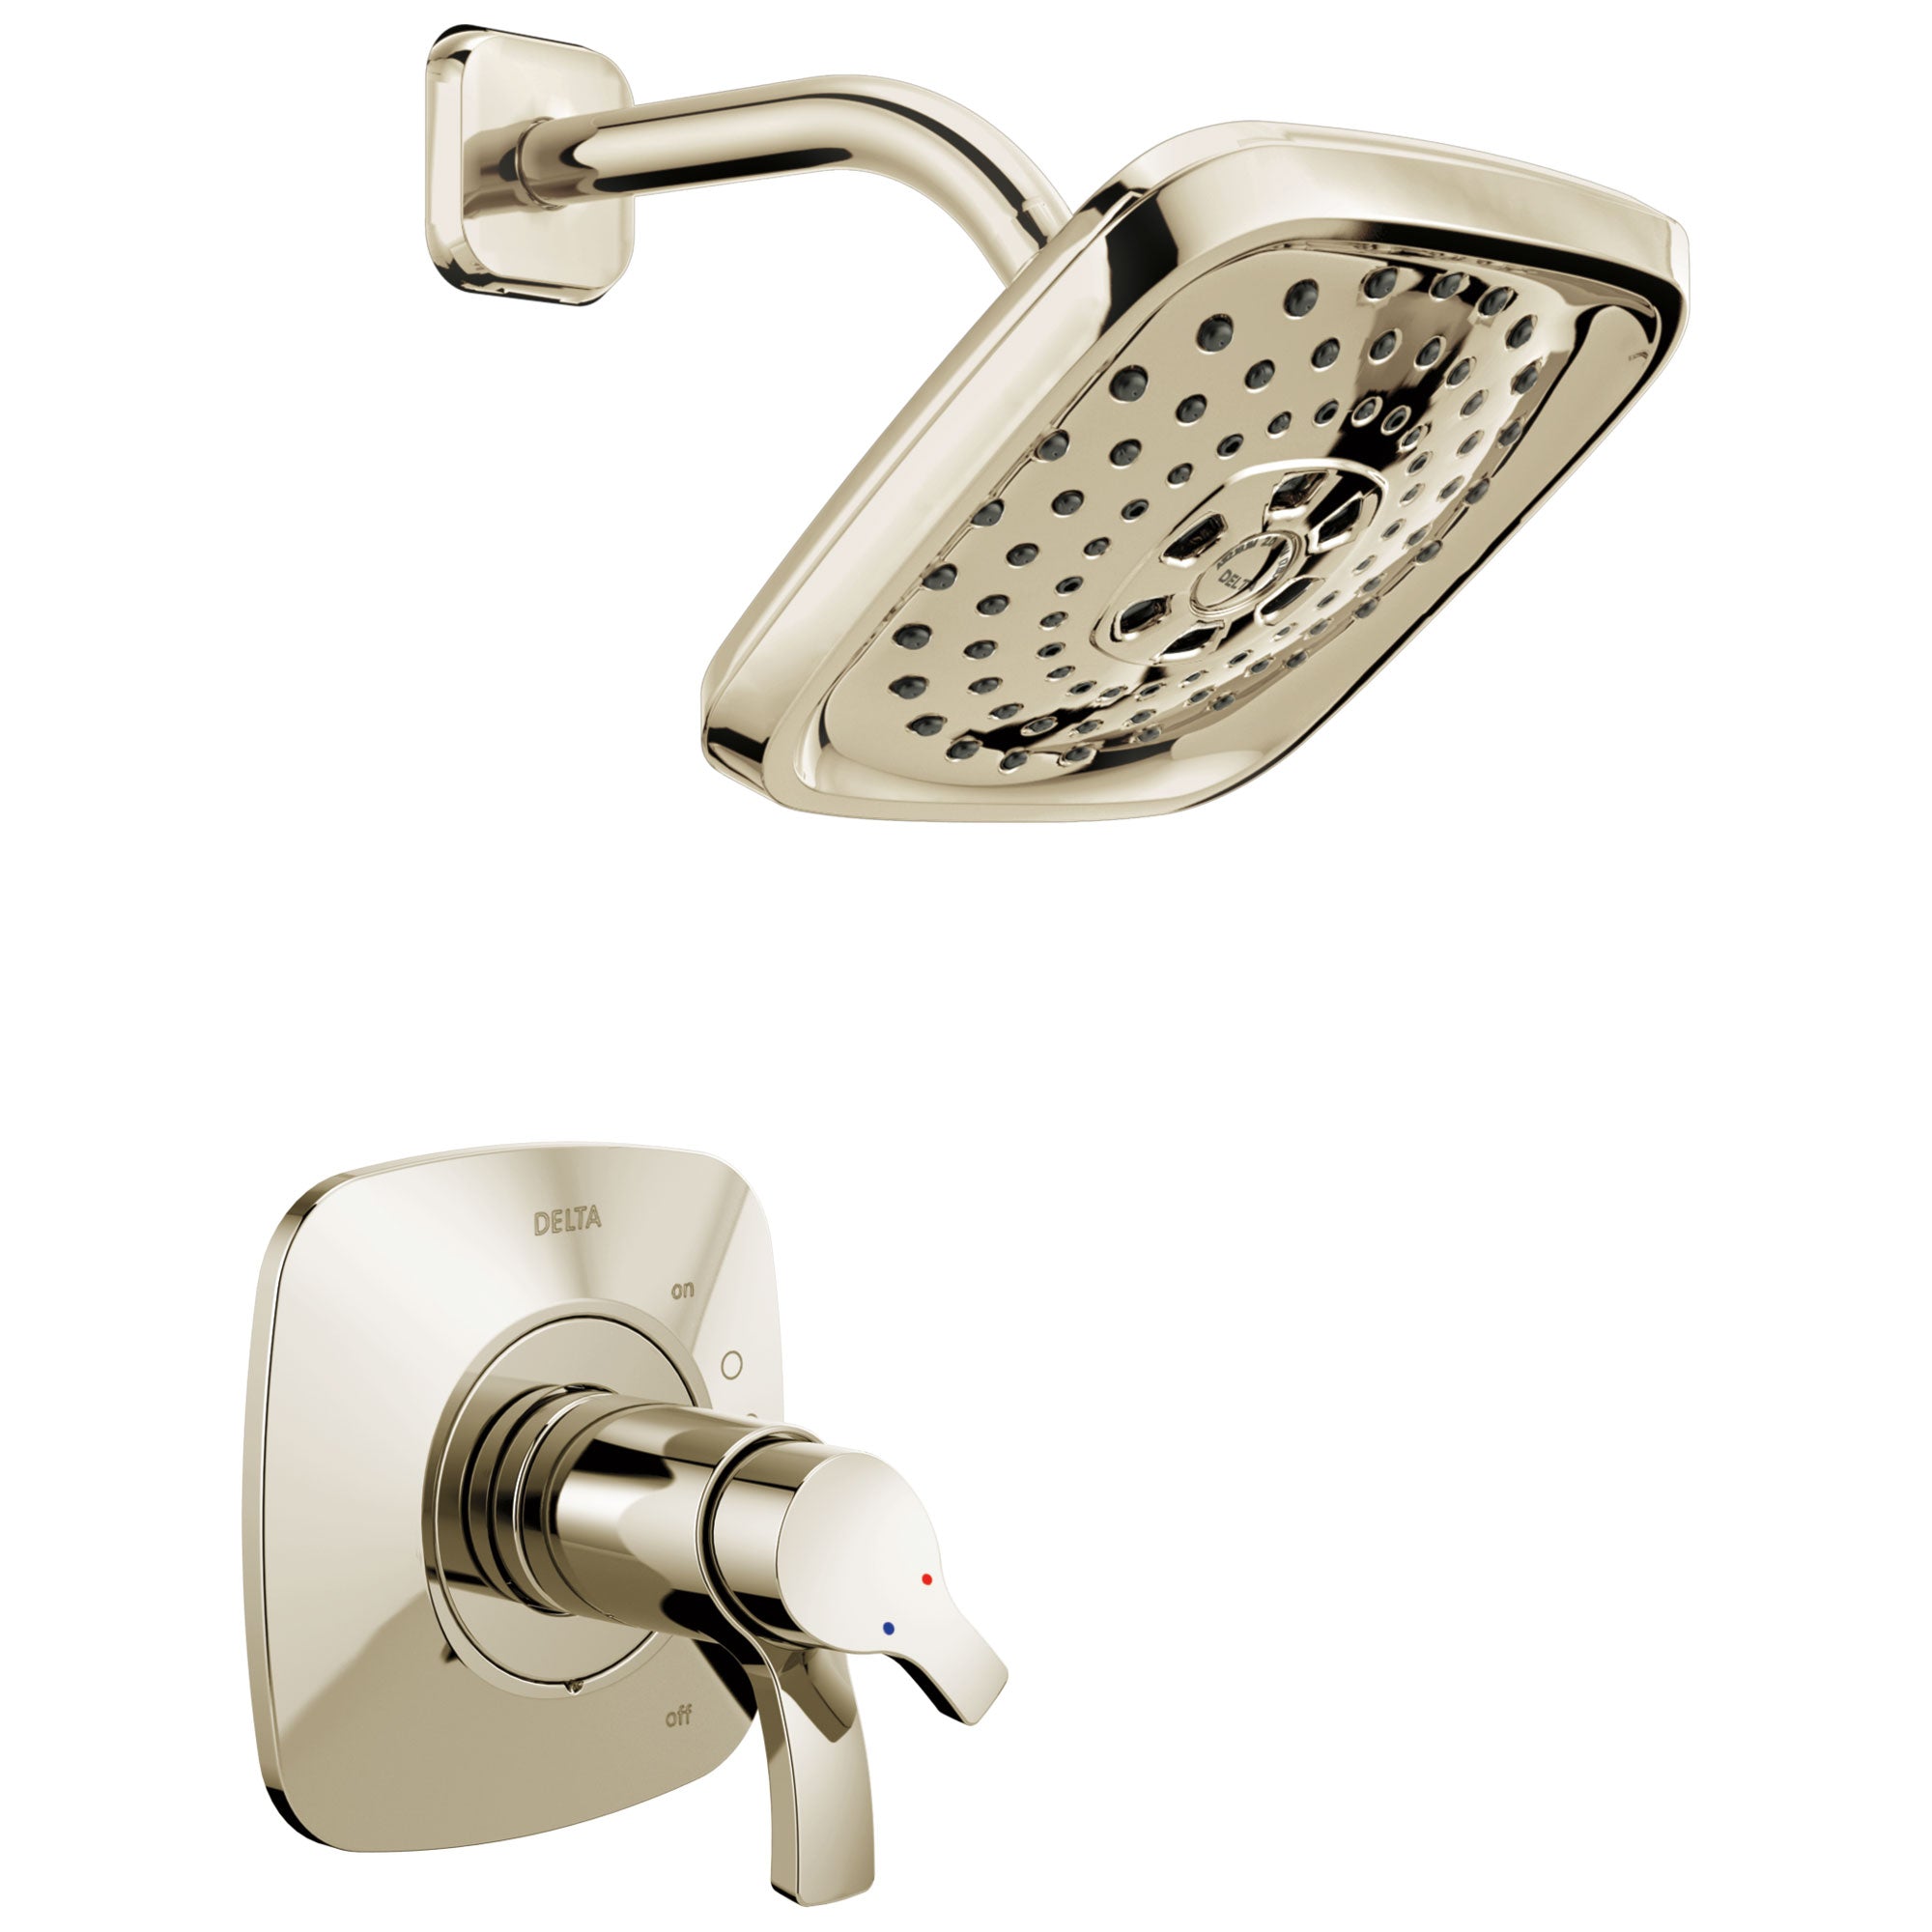 Delta Tesla Collection Polished Nickel TempAssure 17T Series Modern Dual Temp and Pressure Control Shower Faucet Includes Rough-in Valve with Stops D1939V